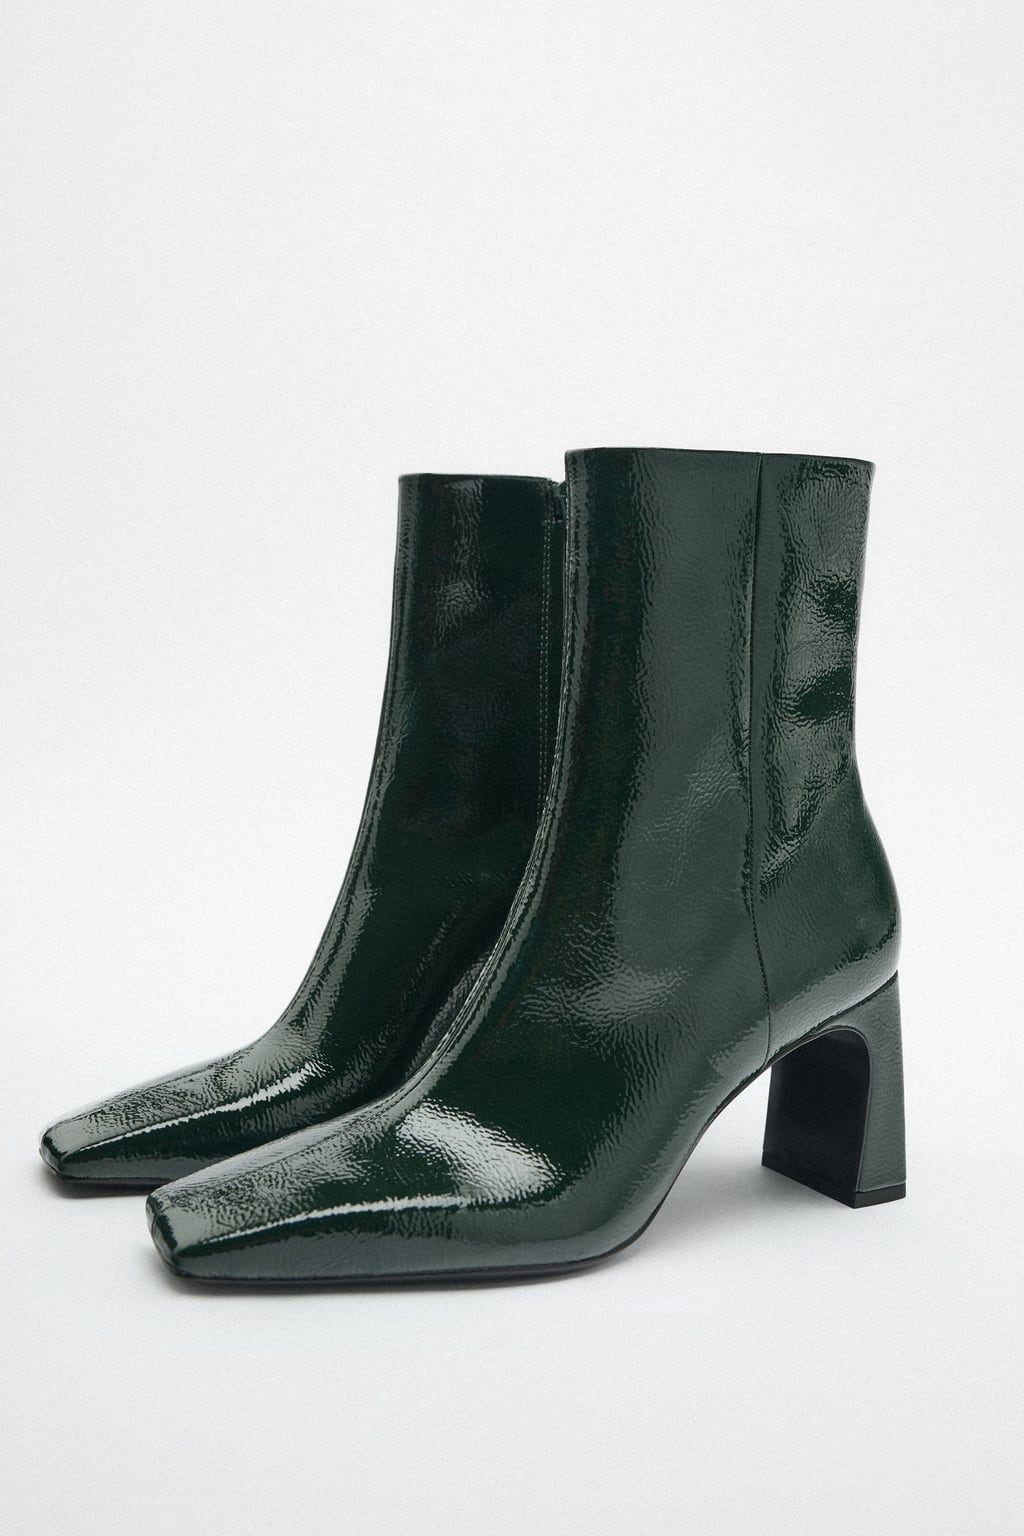 Zara Heeled Square Toe Ankle Boots